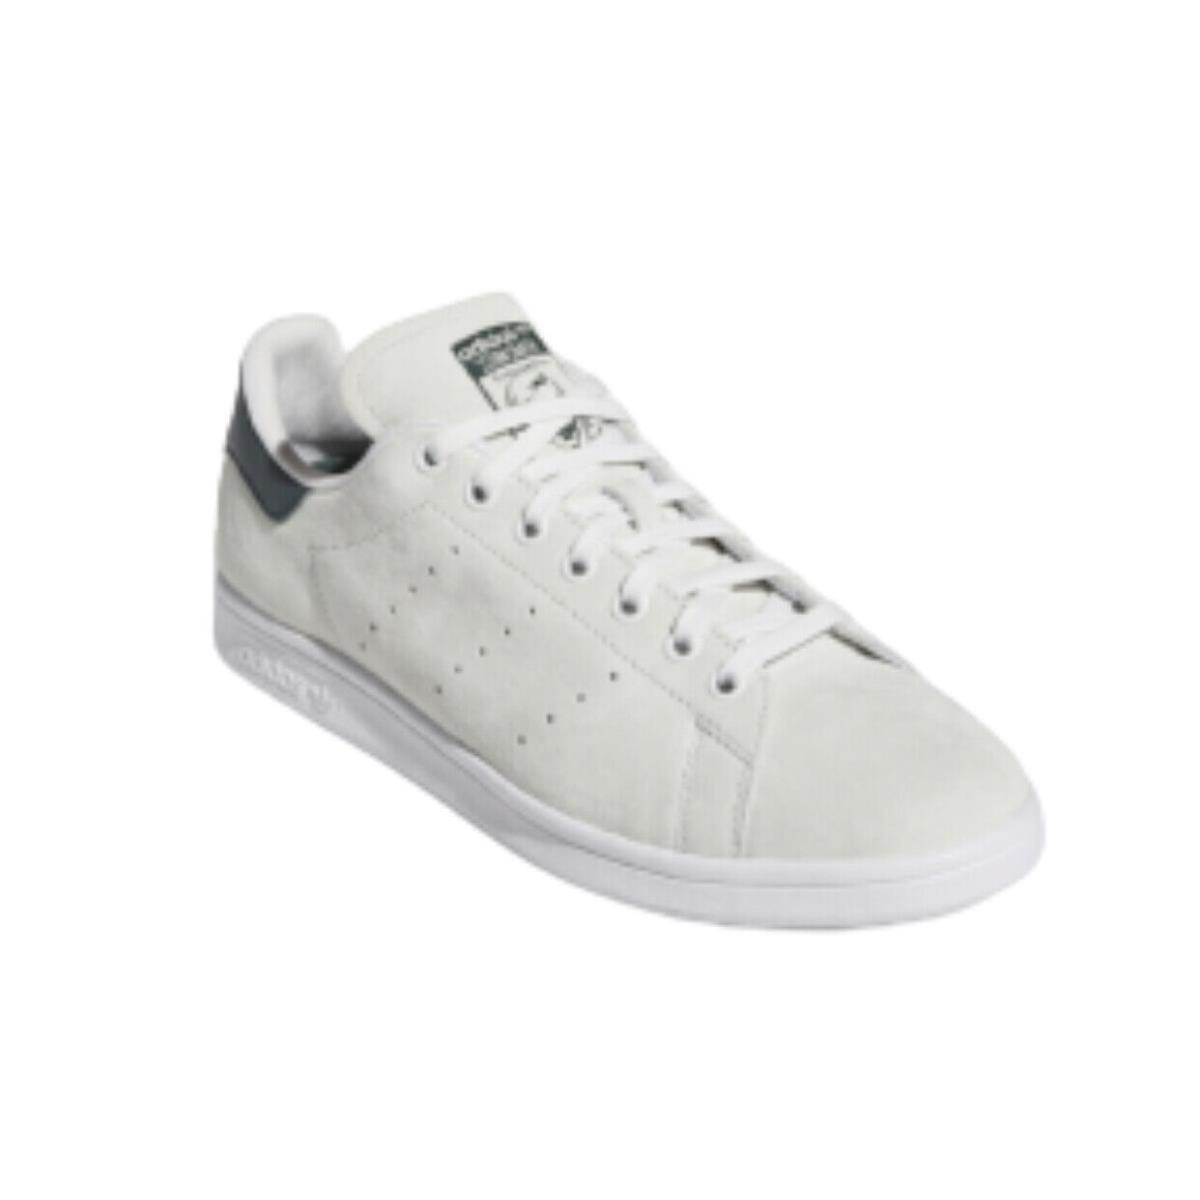 Adidas Stan Smith Adv Shoes FV5942 White / Mineral Green / Cloud White